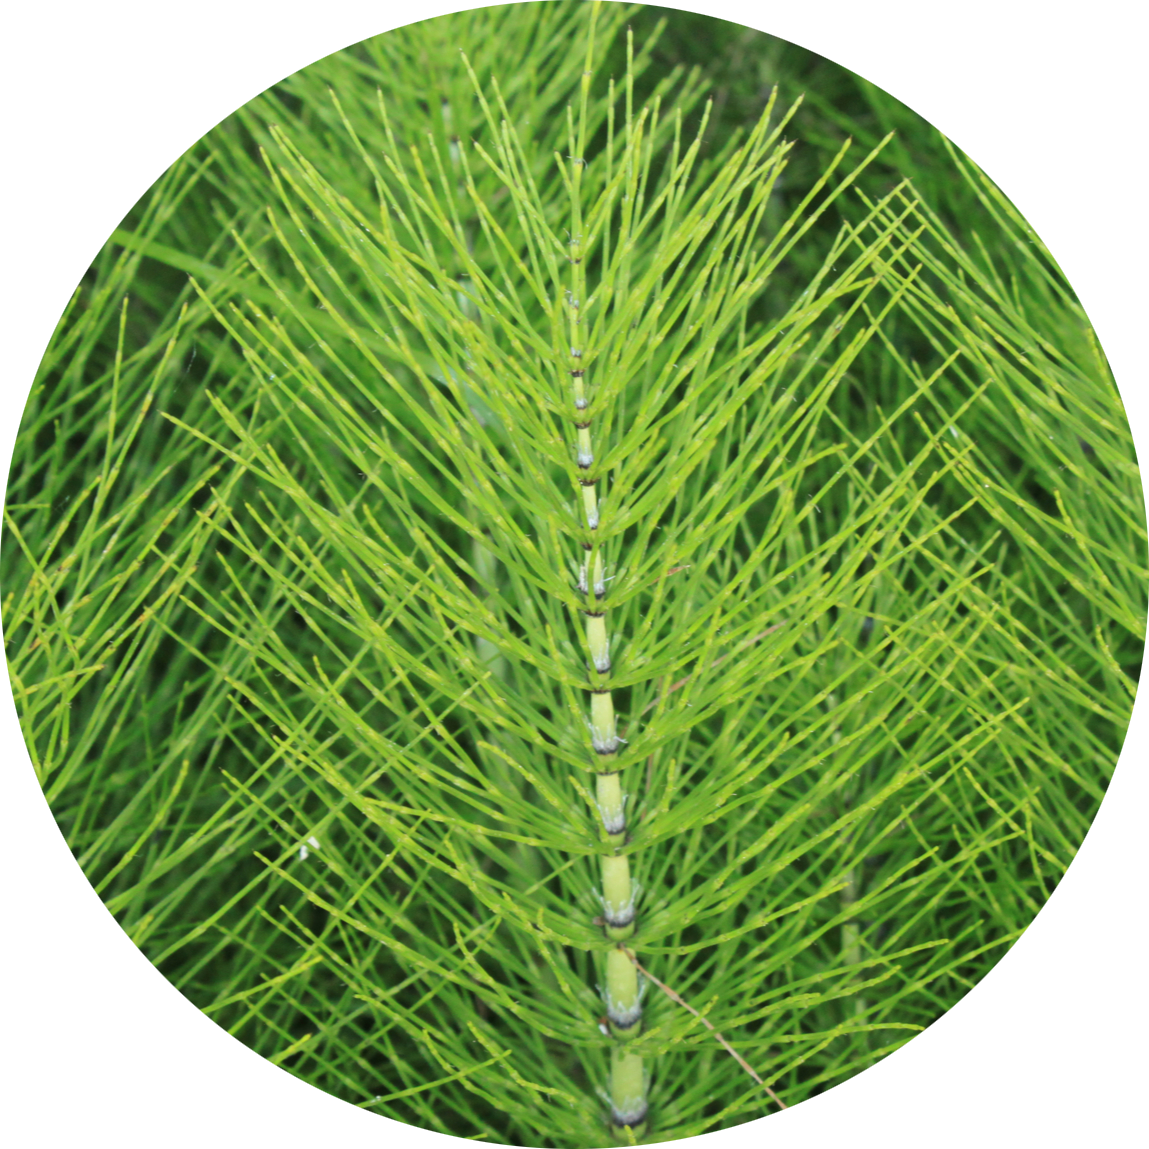 a horsetail sprig